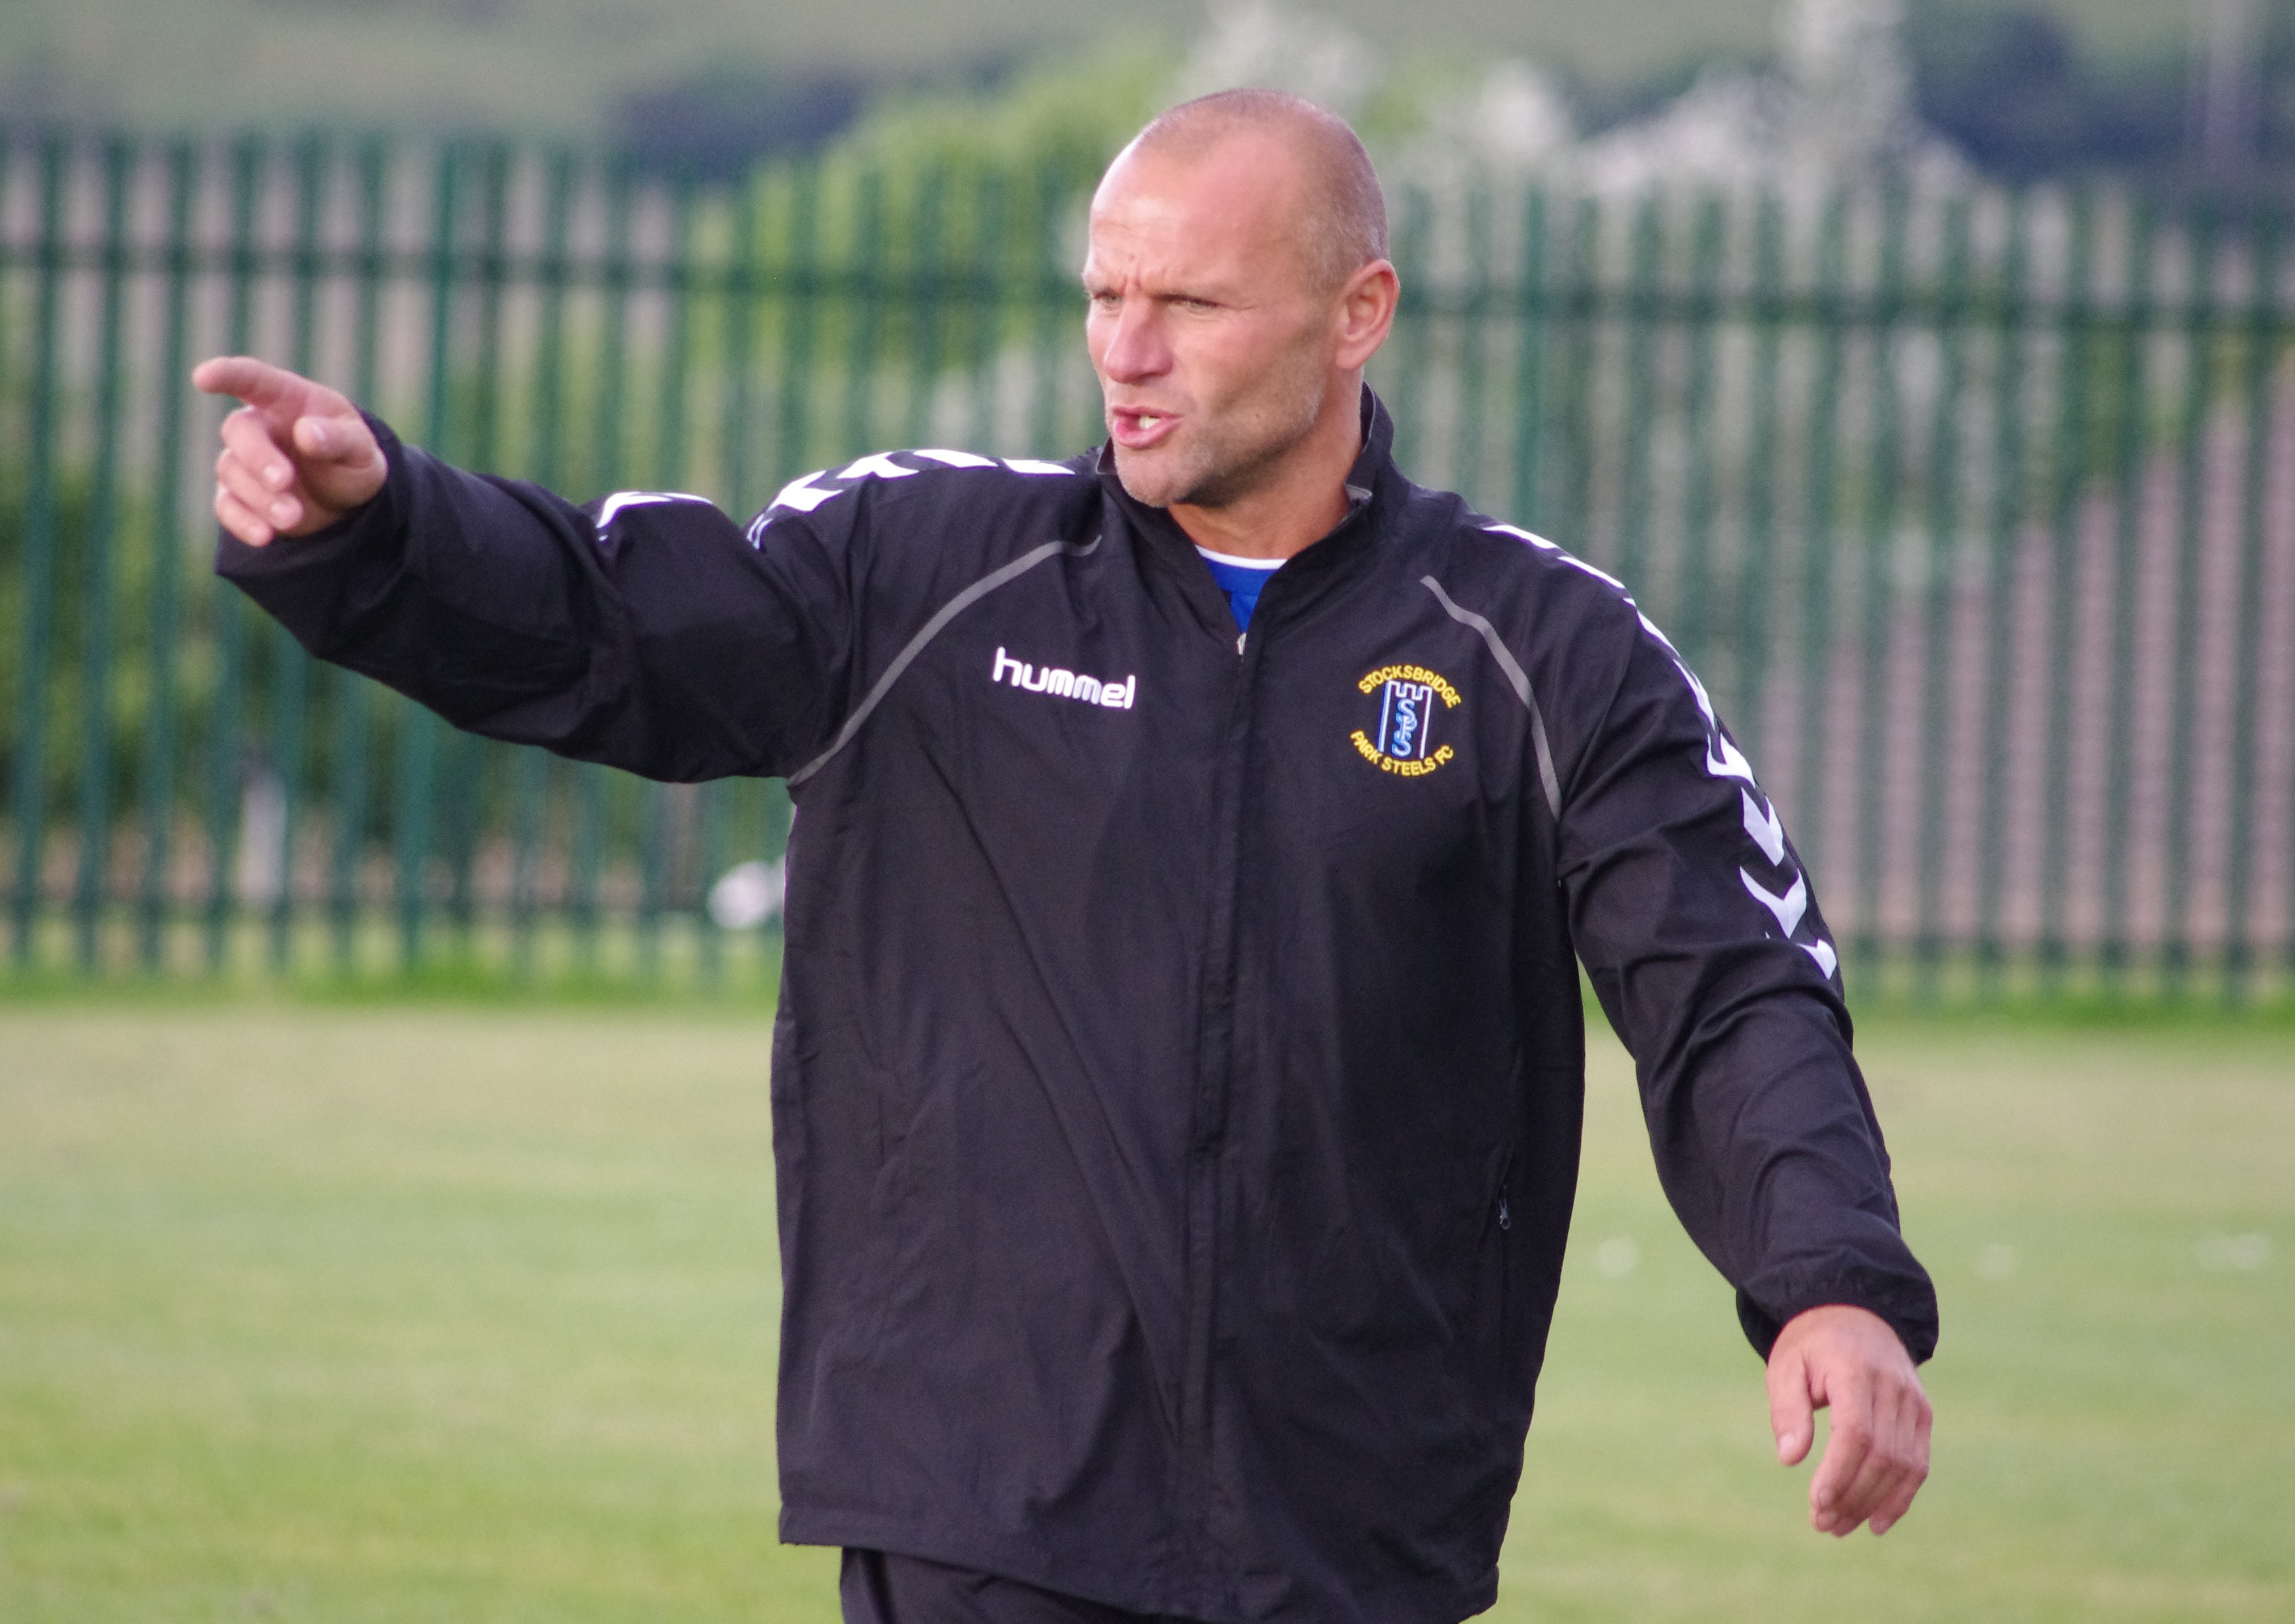 "Committed" Non Leaguue footballer Mark Wilson is trying to reinvent himself as a serious person as assistant manager of Stocksbridge Park Steels